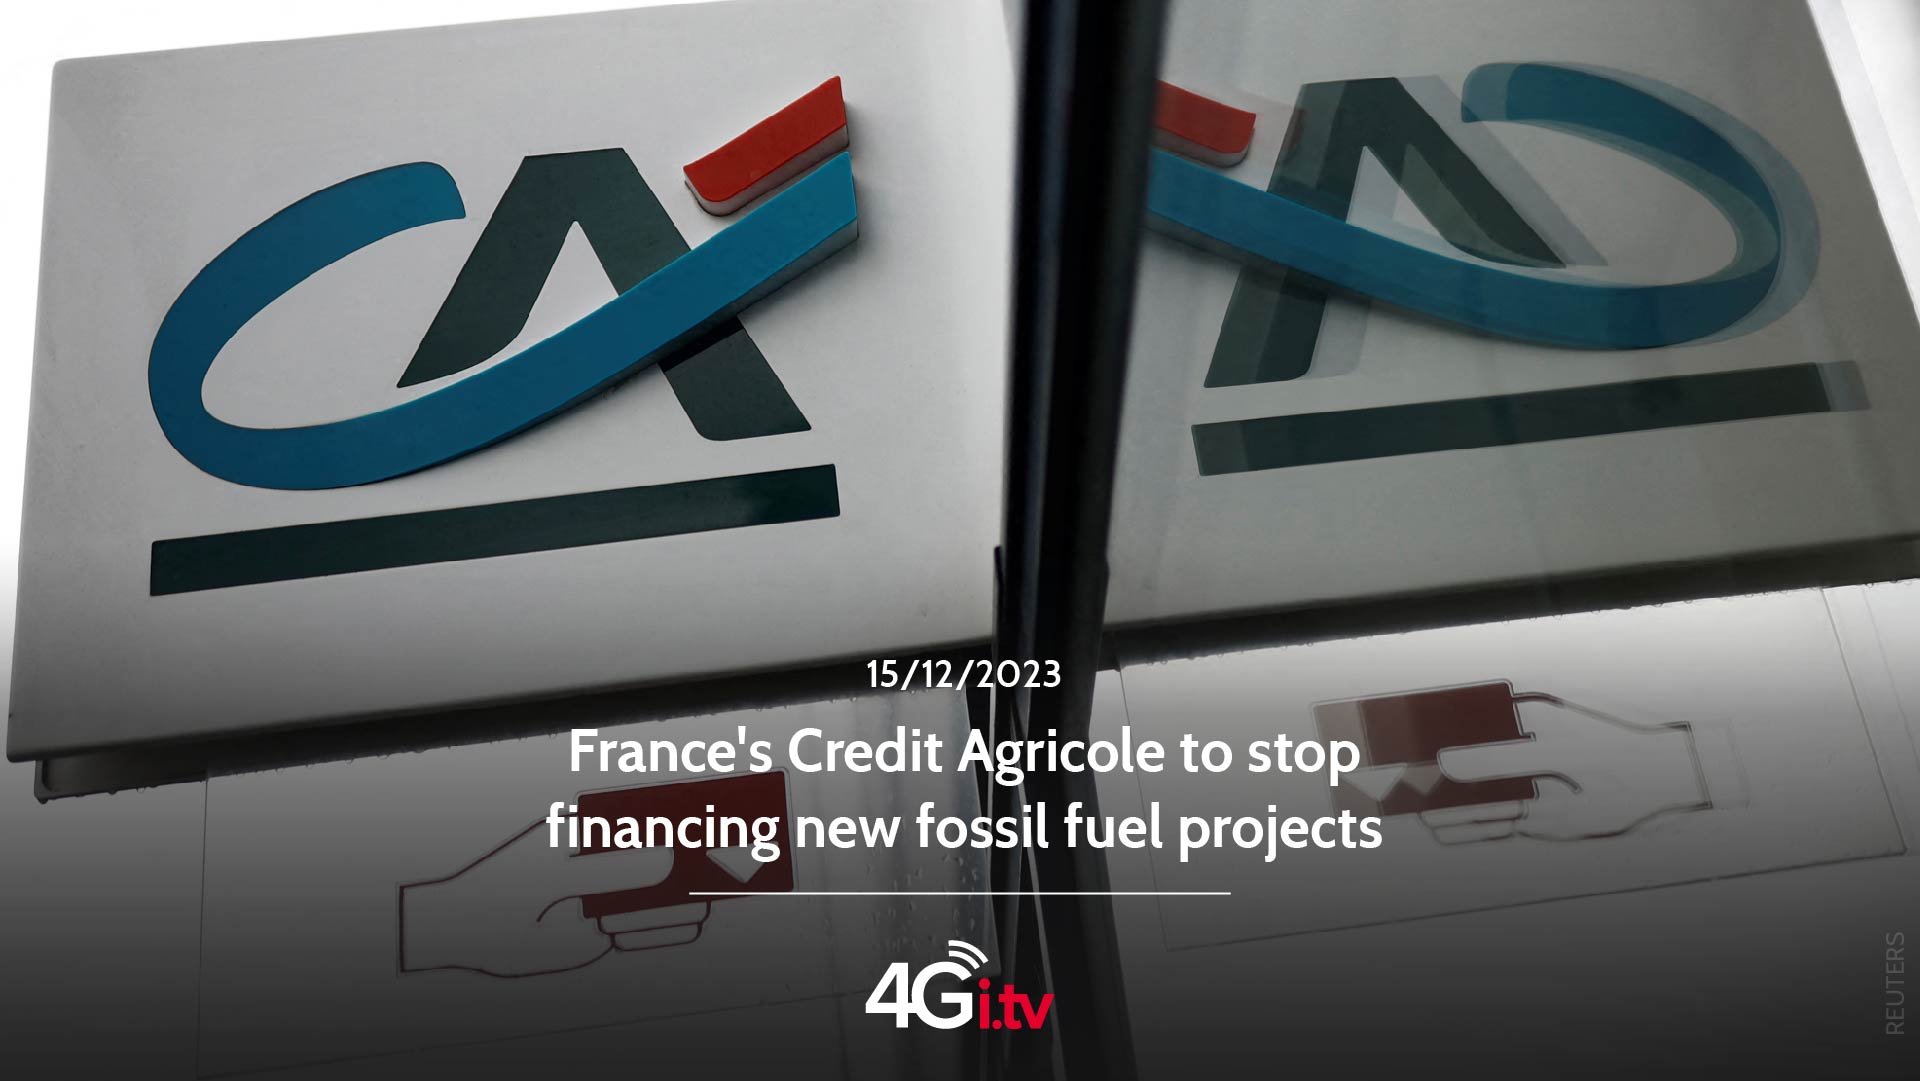 Подробнее о статье France’s Credit Agricole to stop financing new fossil fuel projects